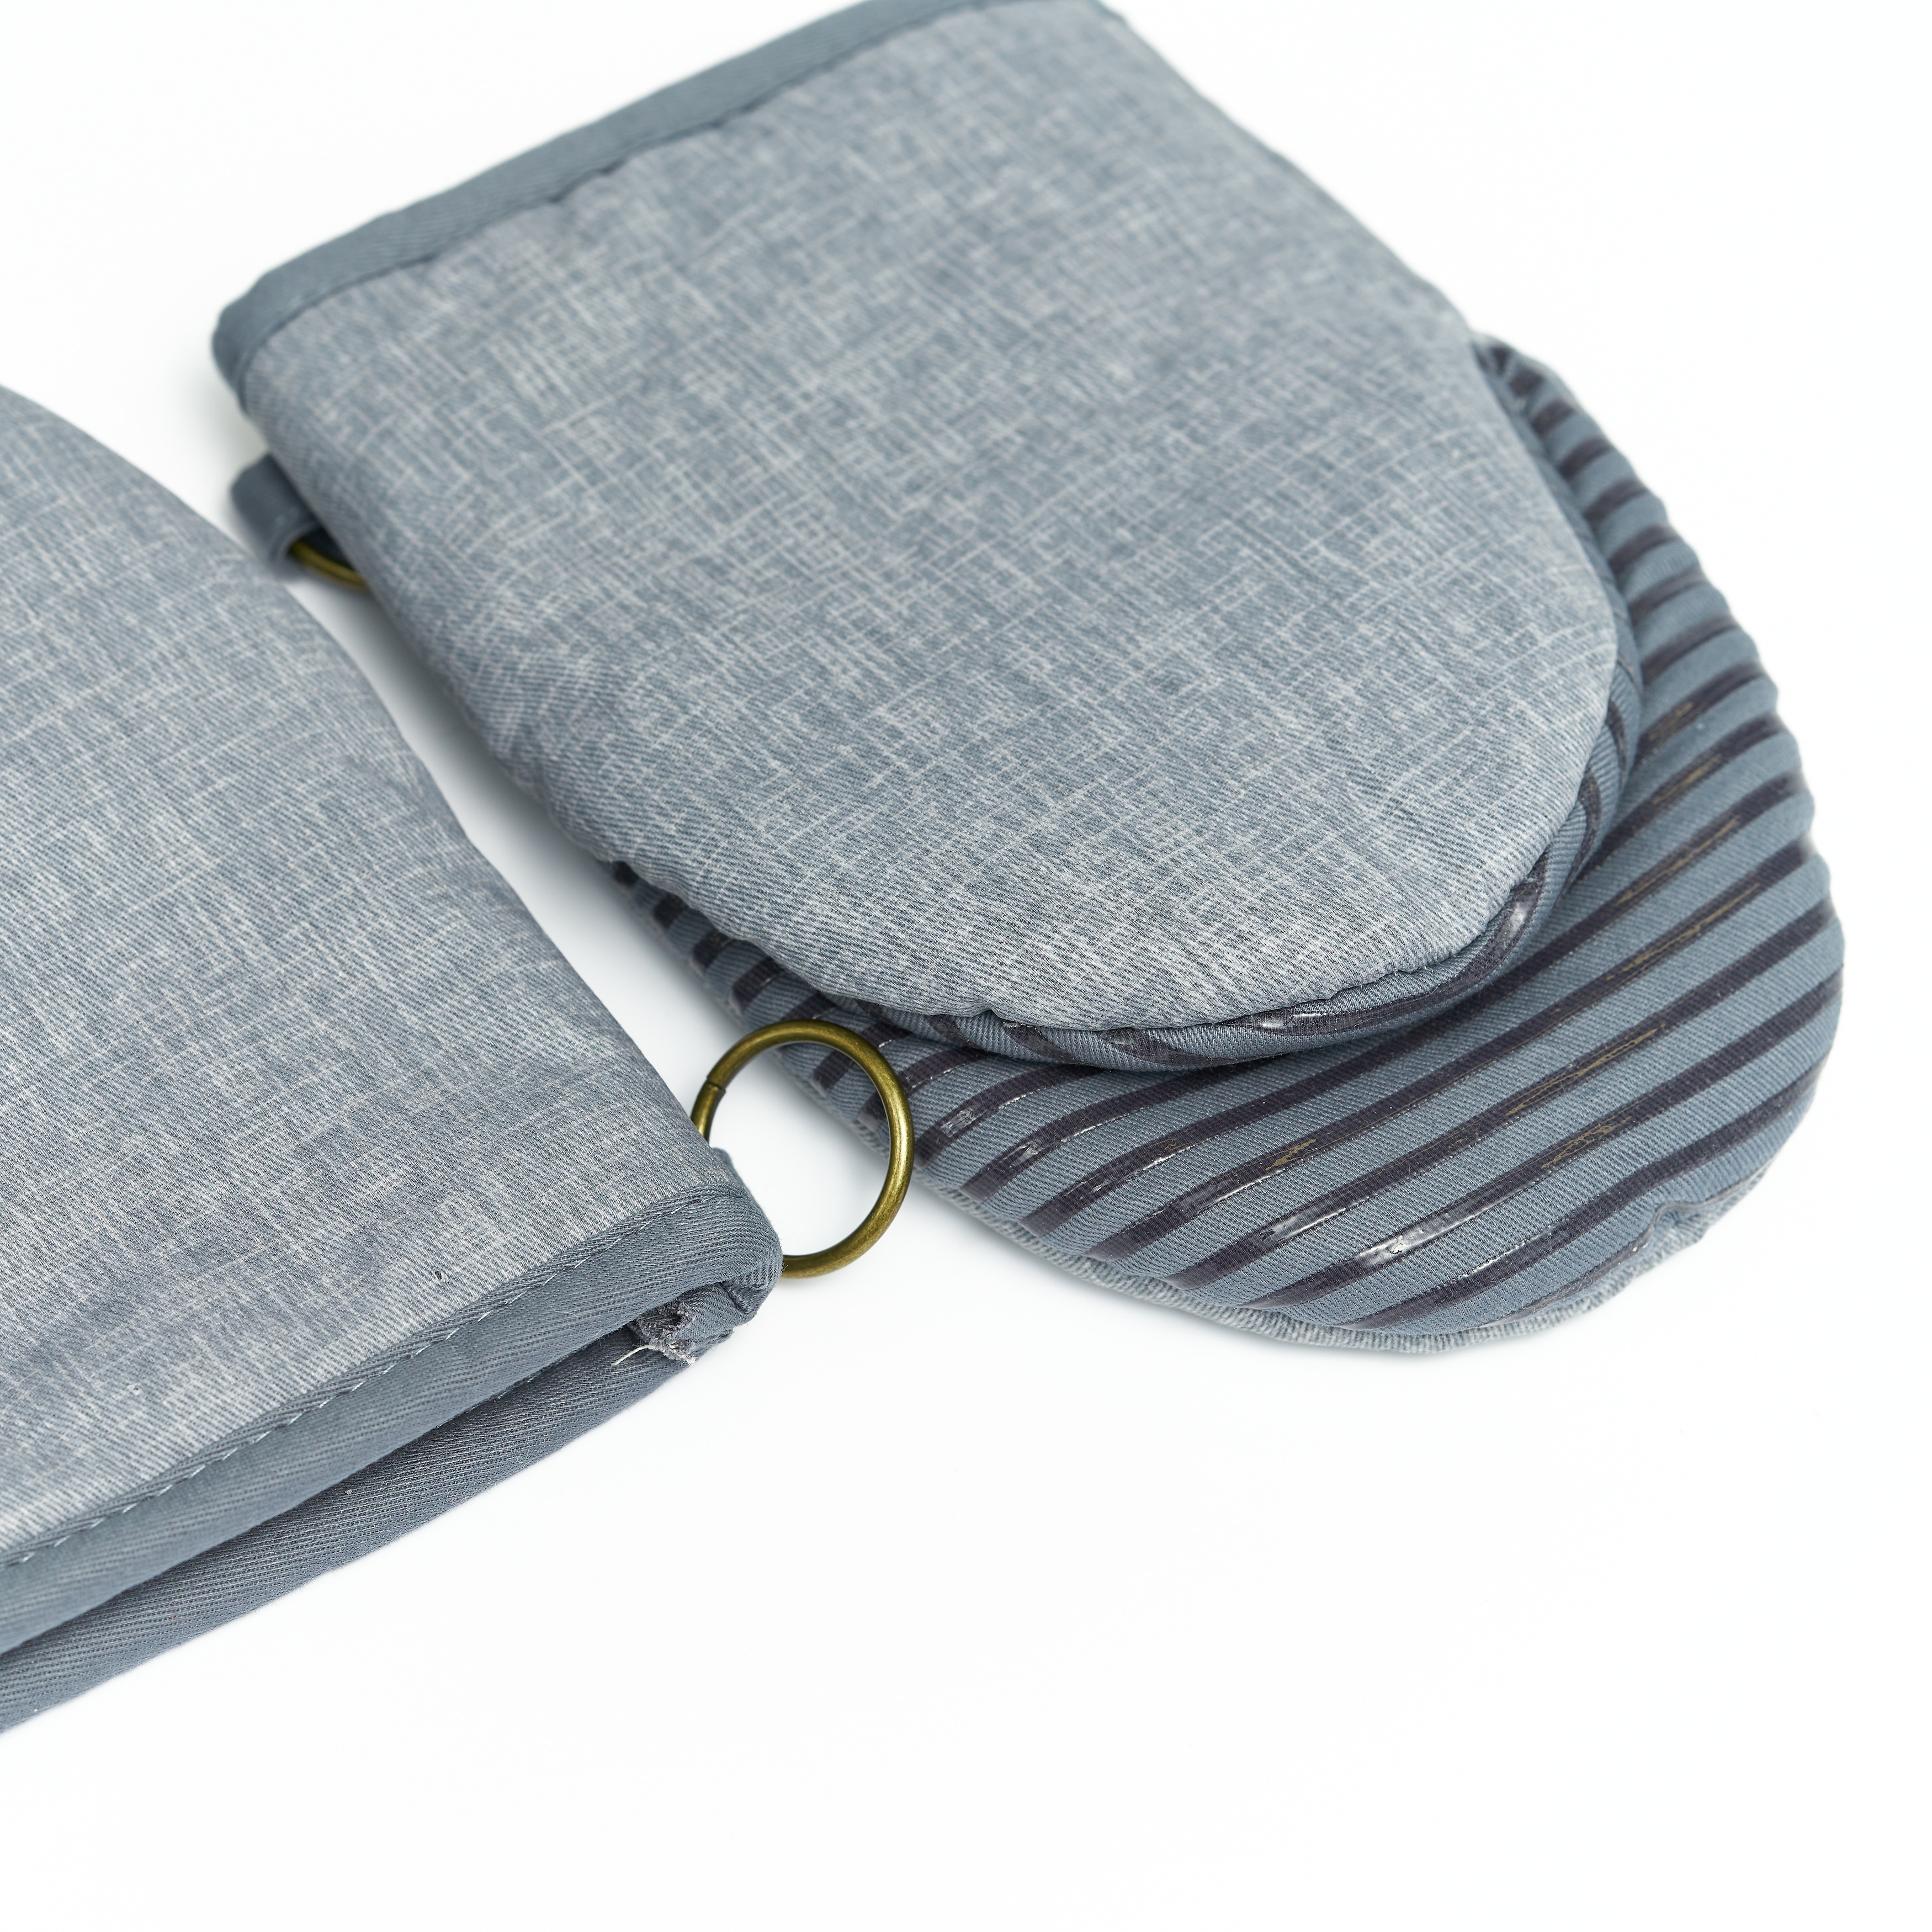 Oven Mitts - Bed Bath & Beyond